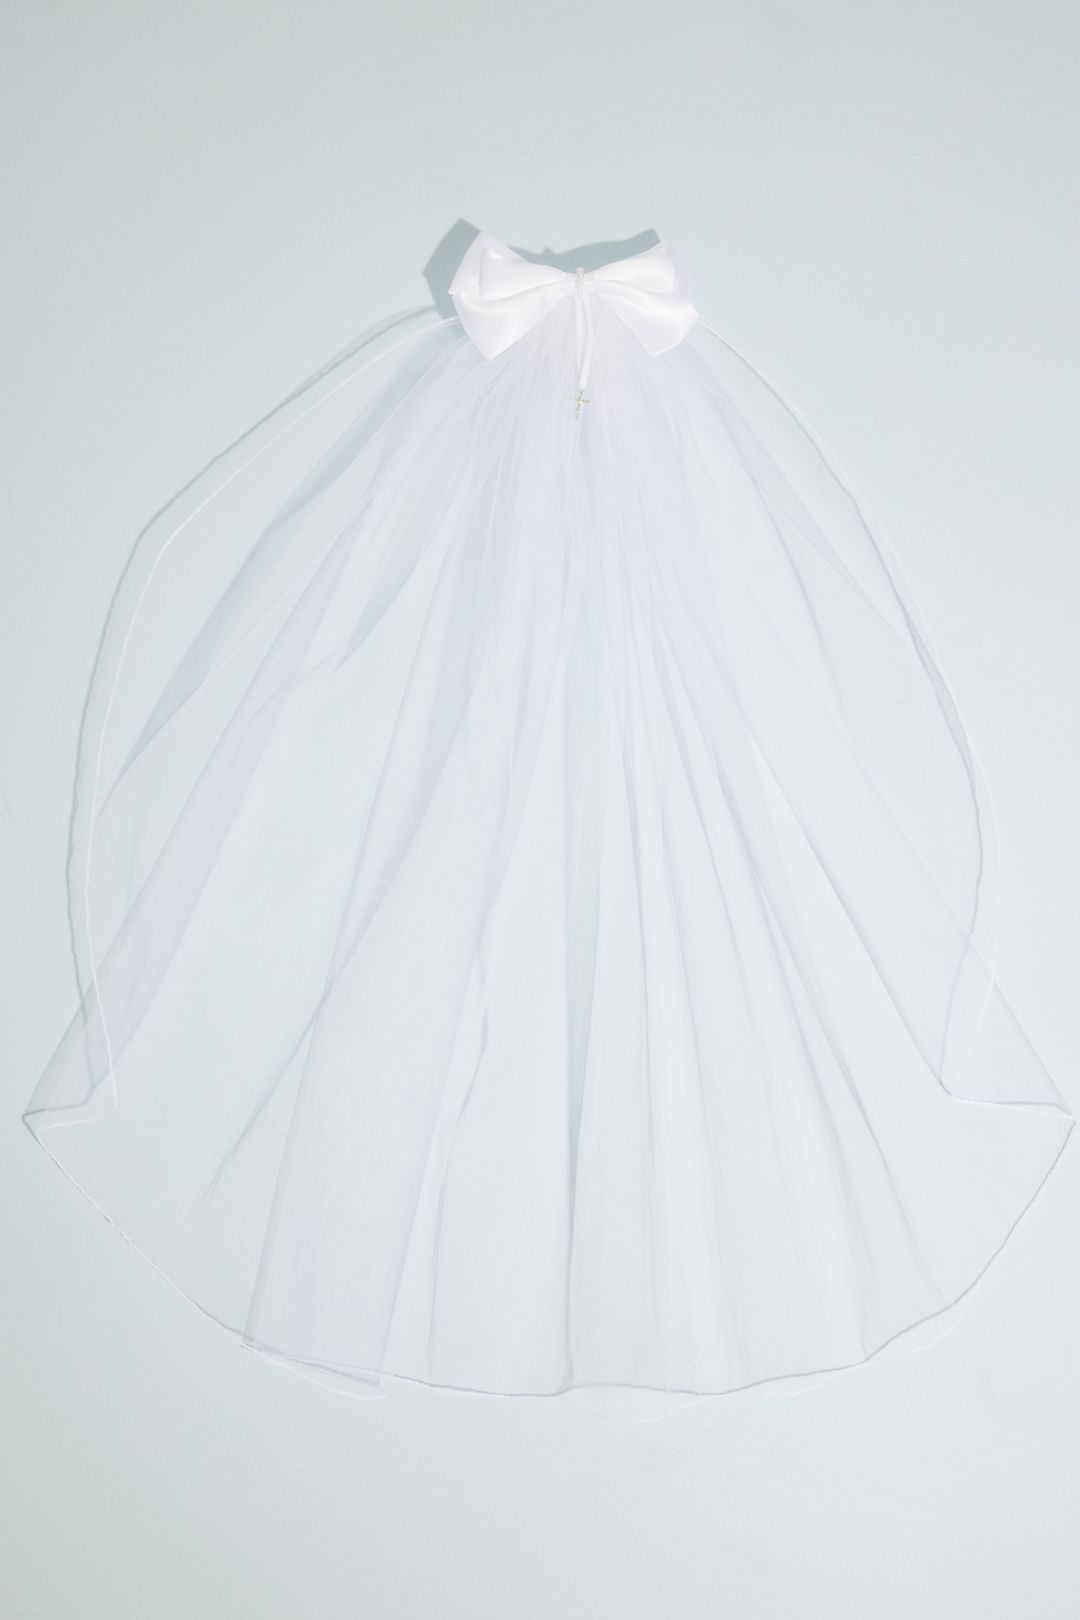 Tulle Communion Veil with Bow Image 1